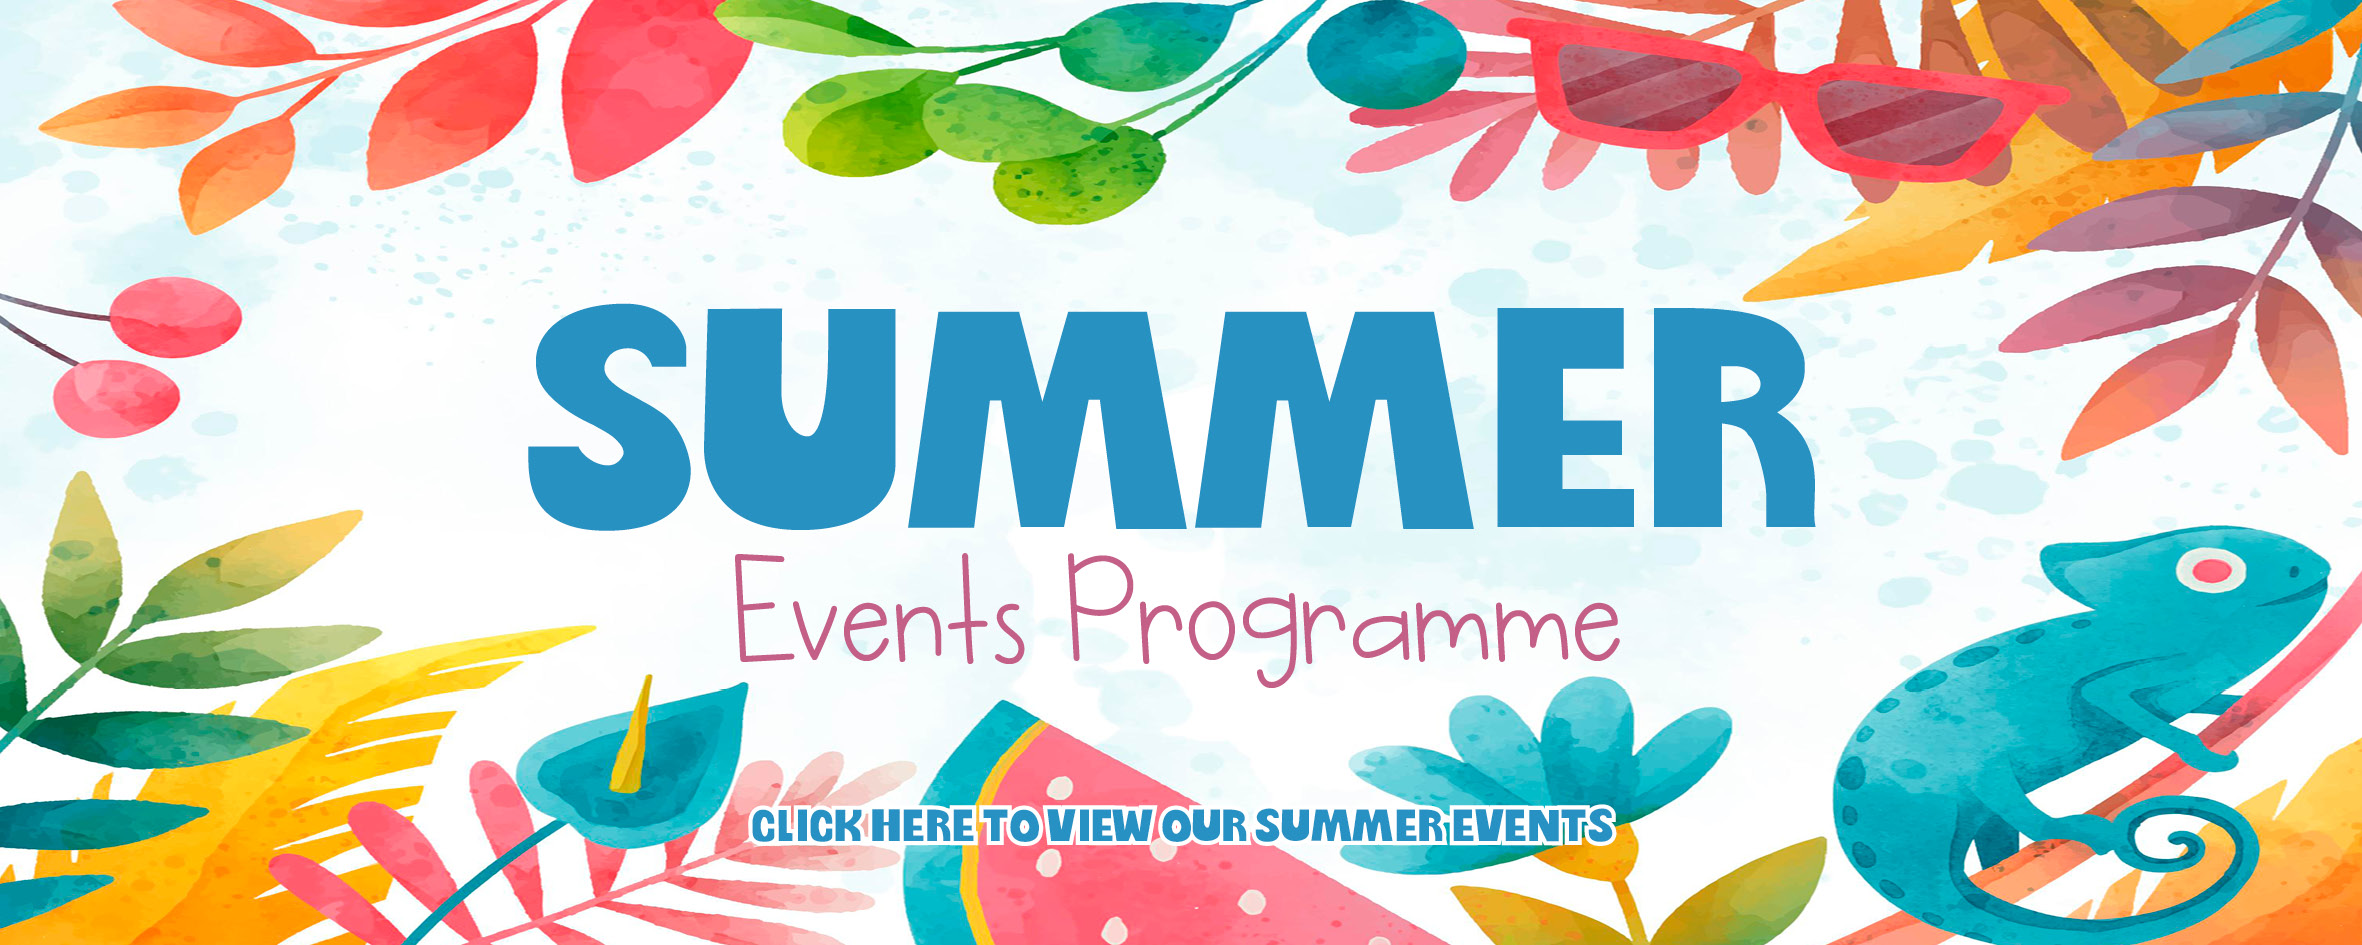 Summer Events Banners 2021